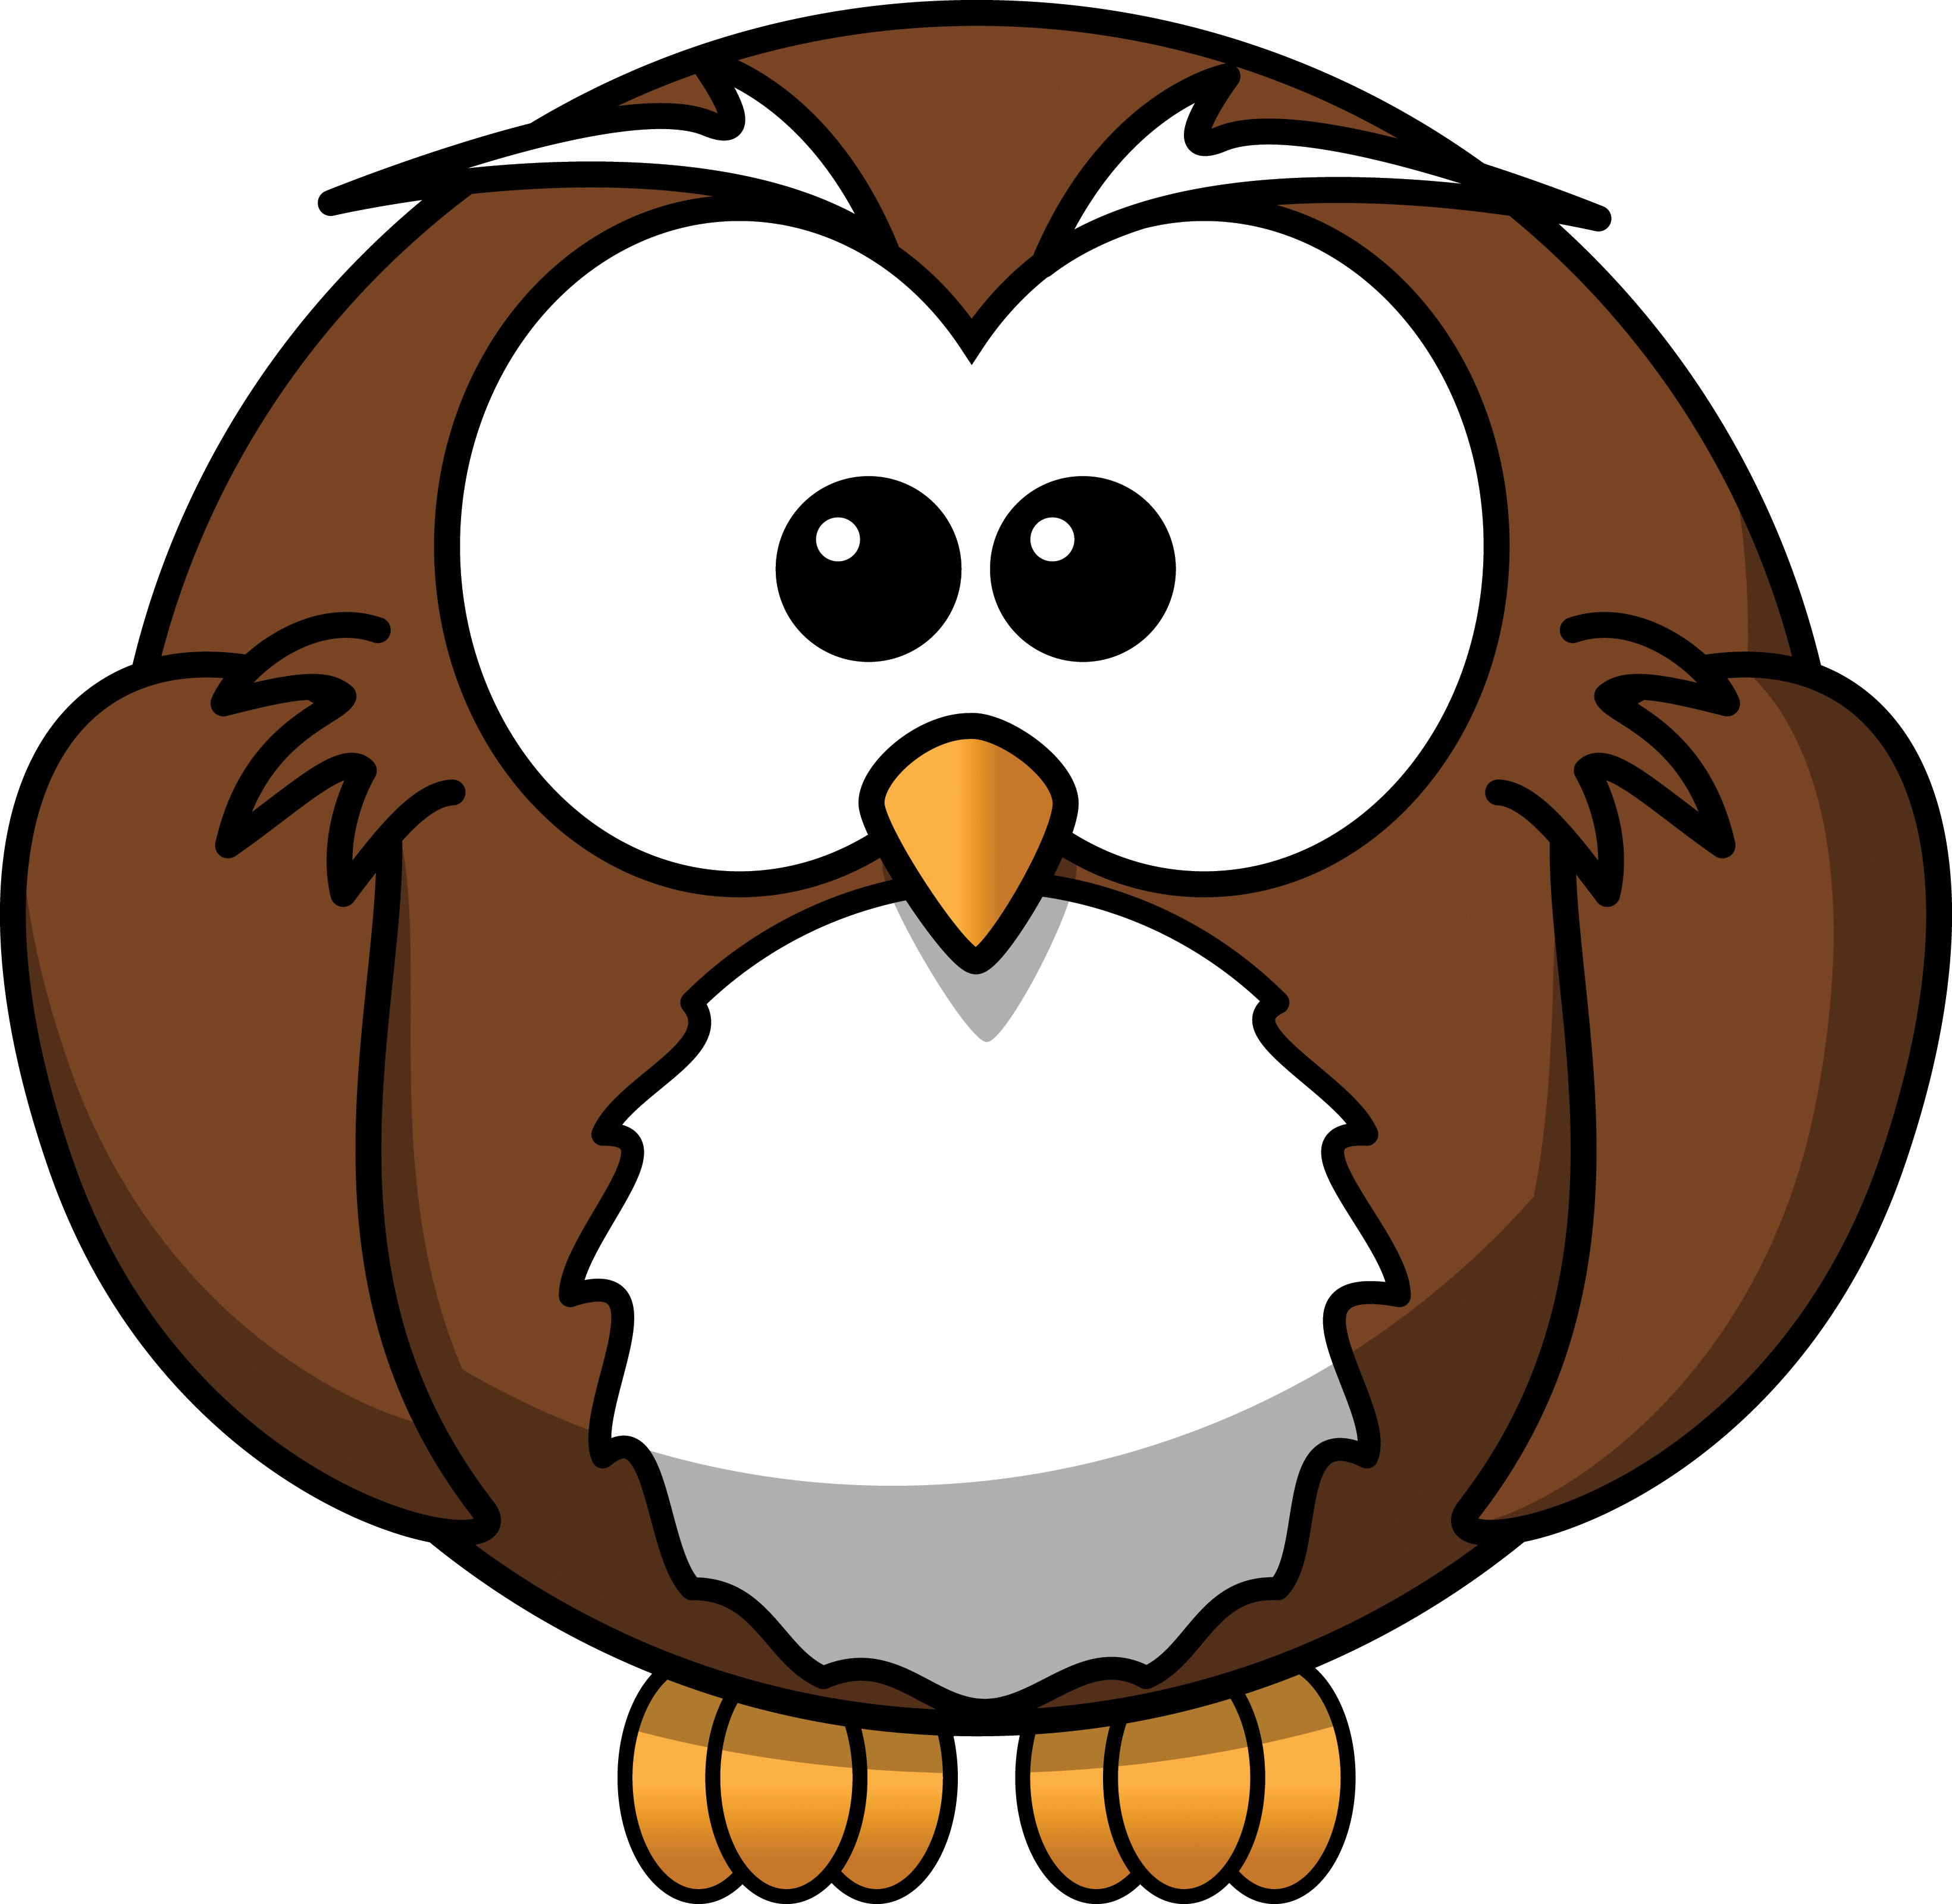 Free Cartoon Owl Clipart by 0001176 .